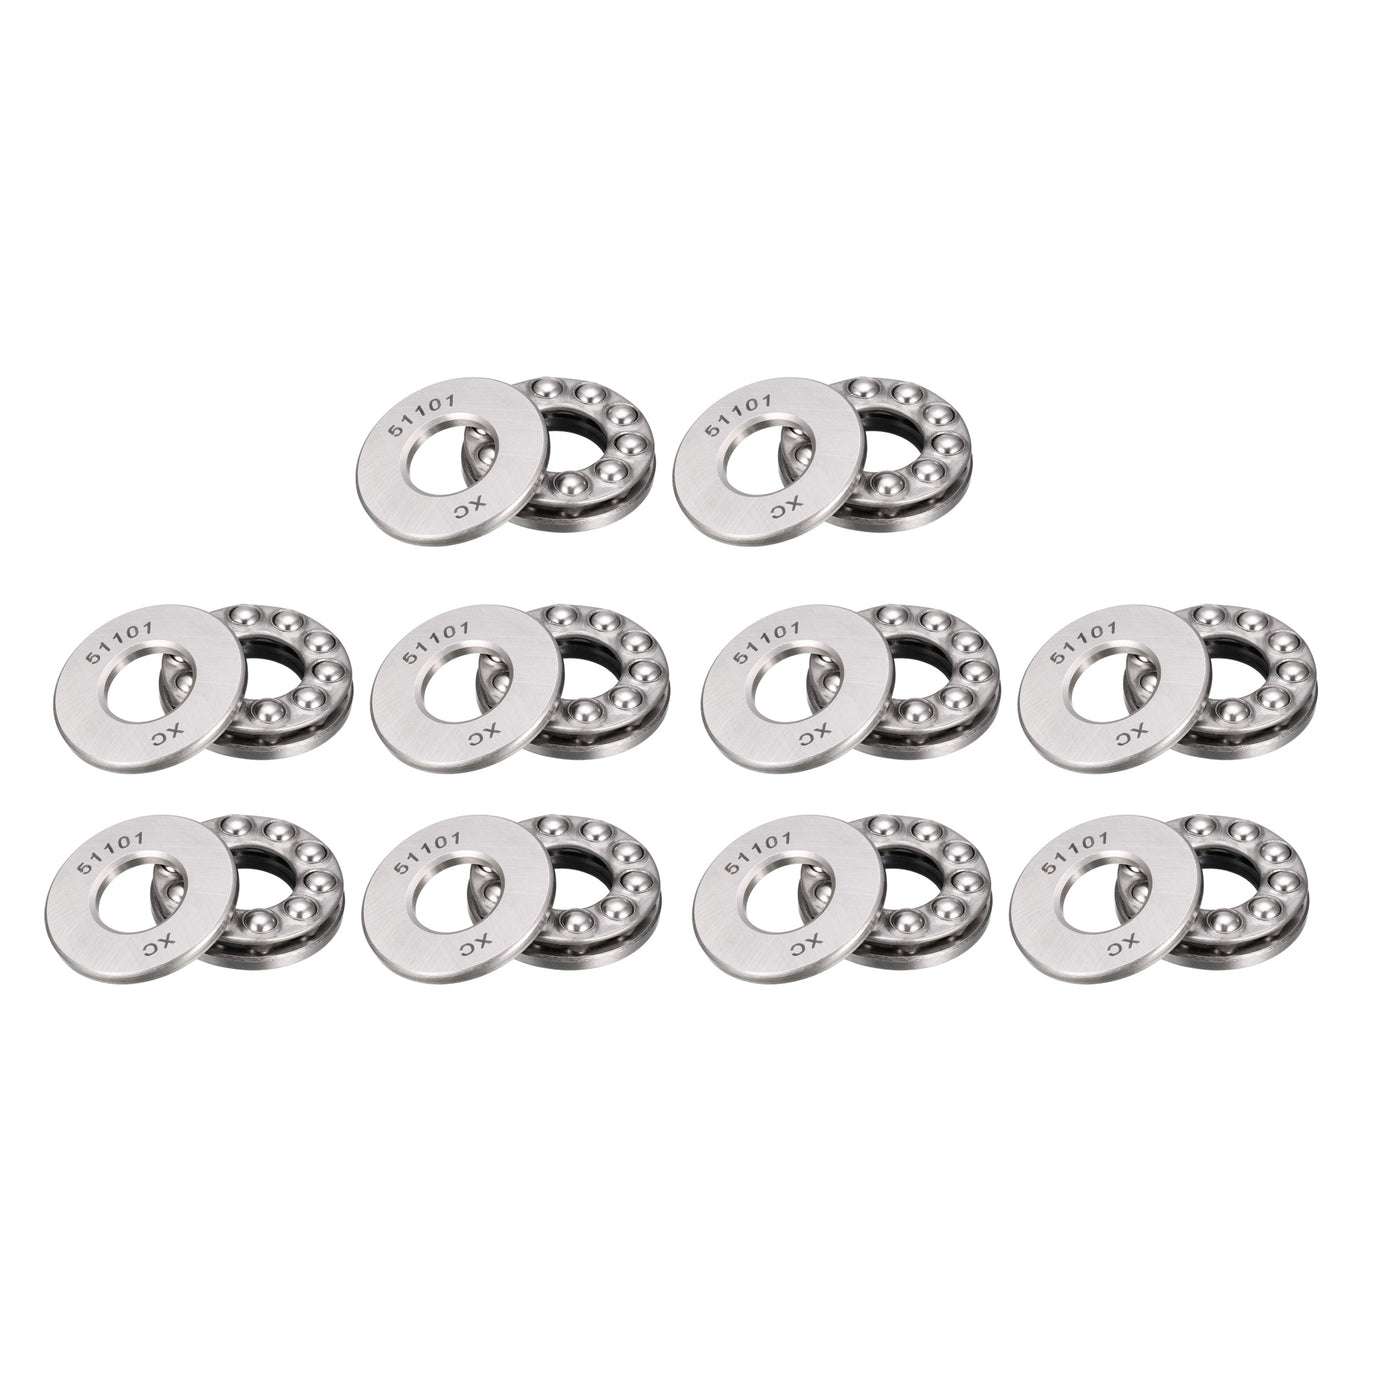 uxcell Uxcell 51101 Miniature Thrust Ball Bearing 12x26x9mm Chrome Steel with Washer 10pcs